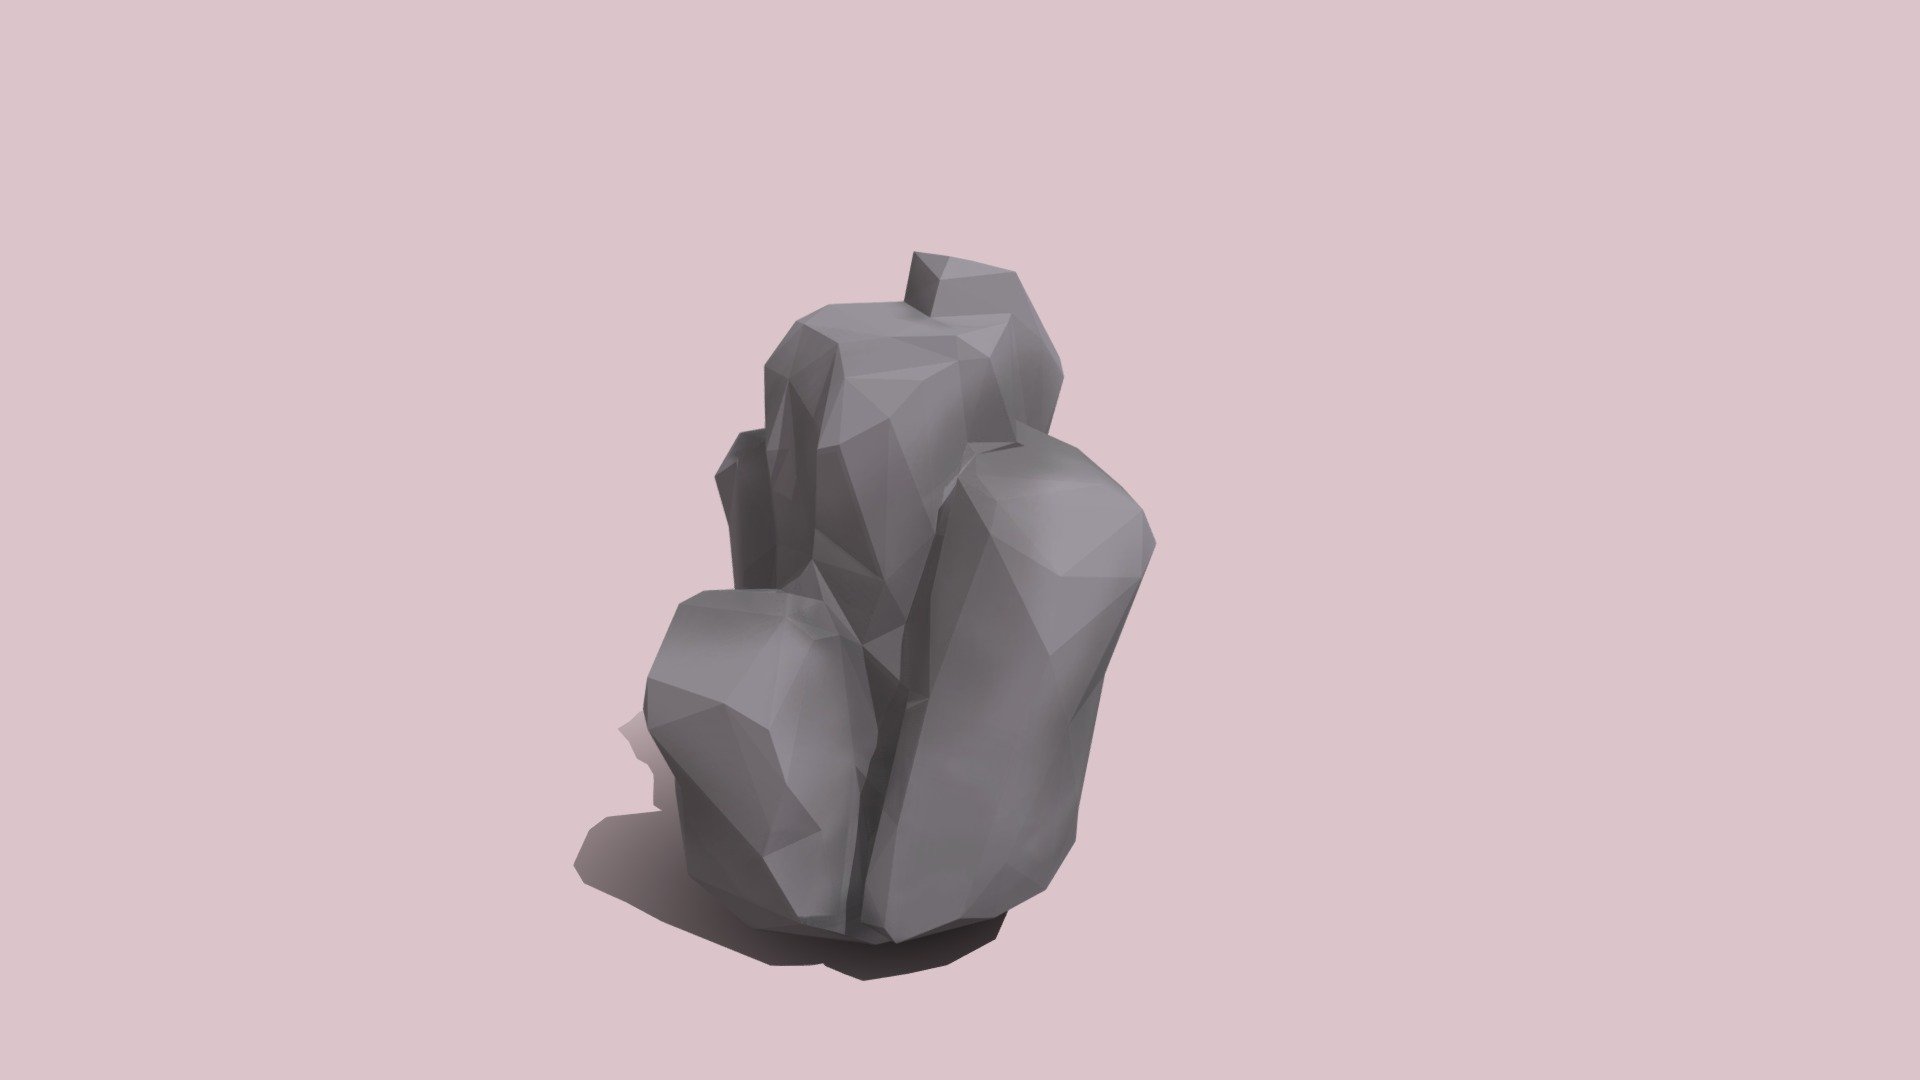 Detailed Lowpoly Rock
Cool Lowpoly Rock

Detailed LowPoly Rock Specifications
- This Asset has been Uv Mapped 3d model